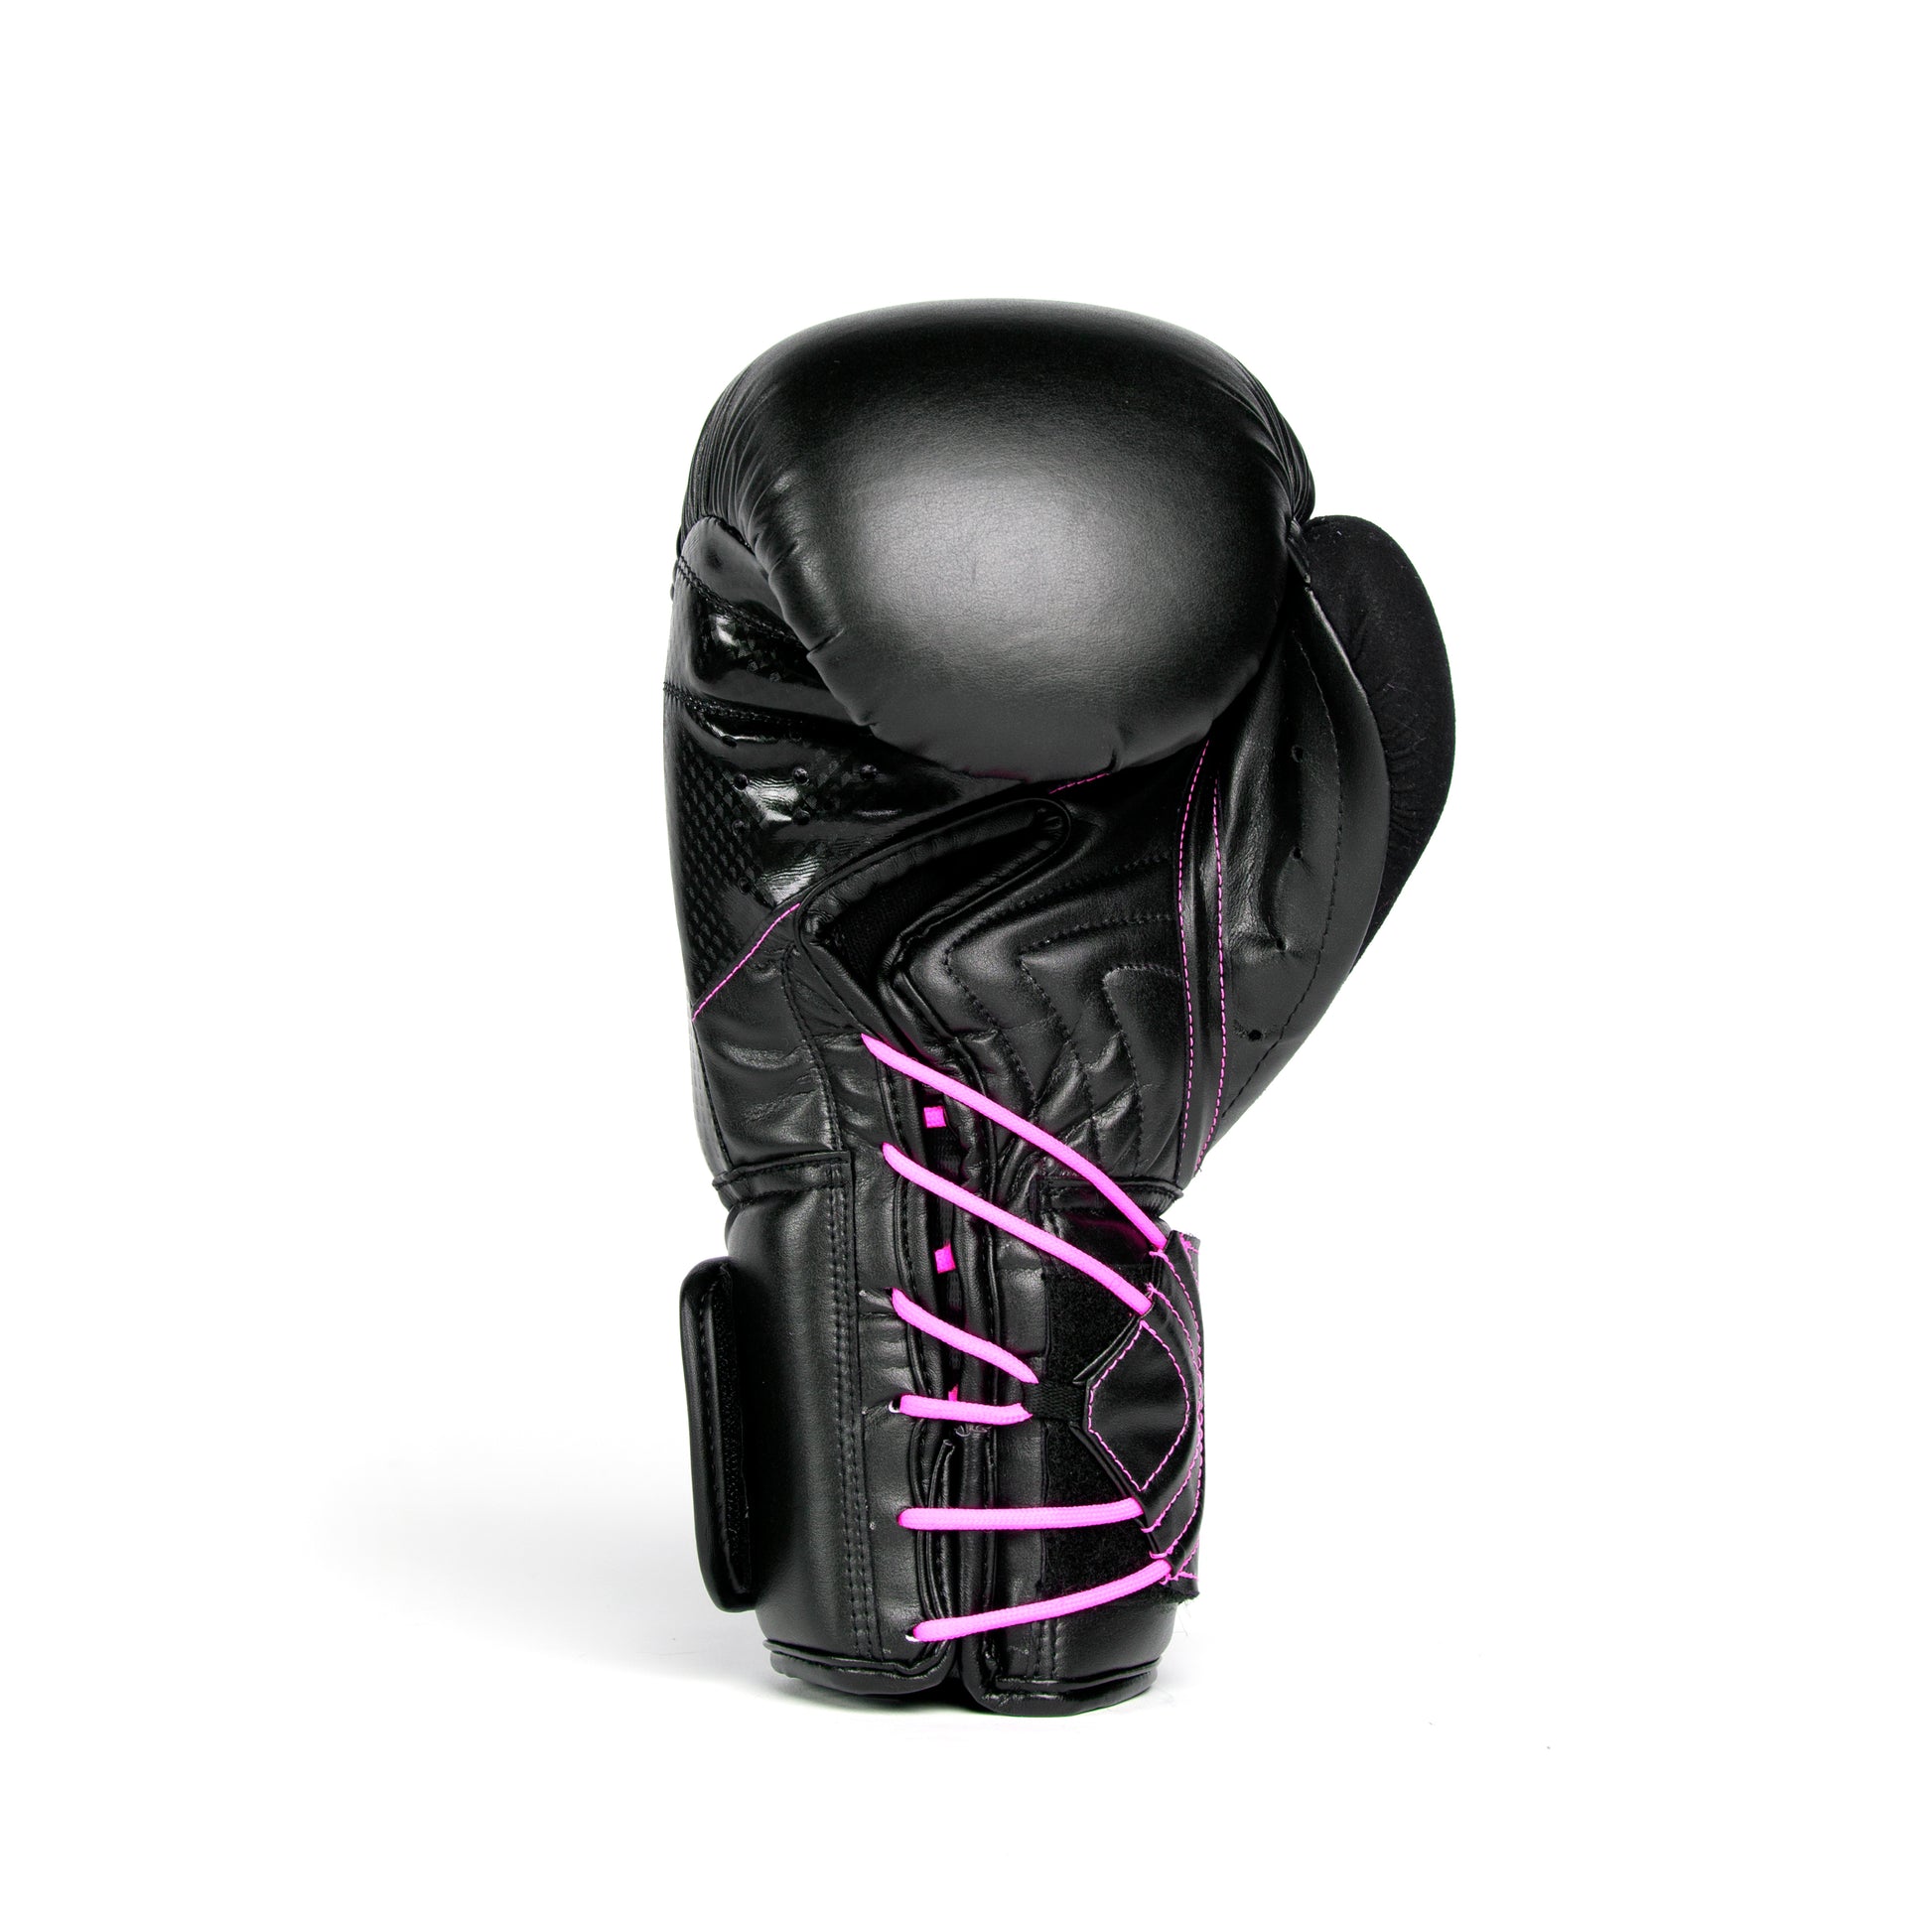 Protex Boxing Gloves - Everlast